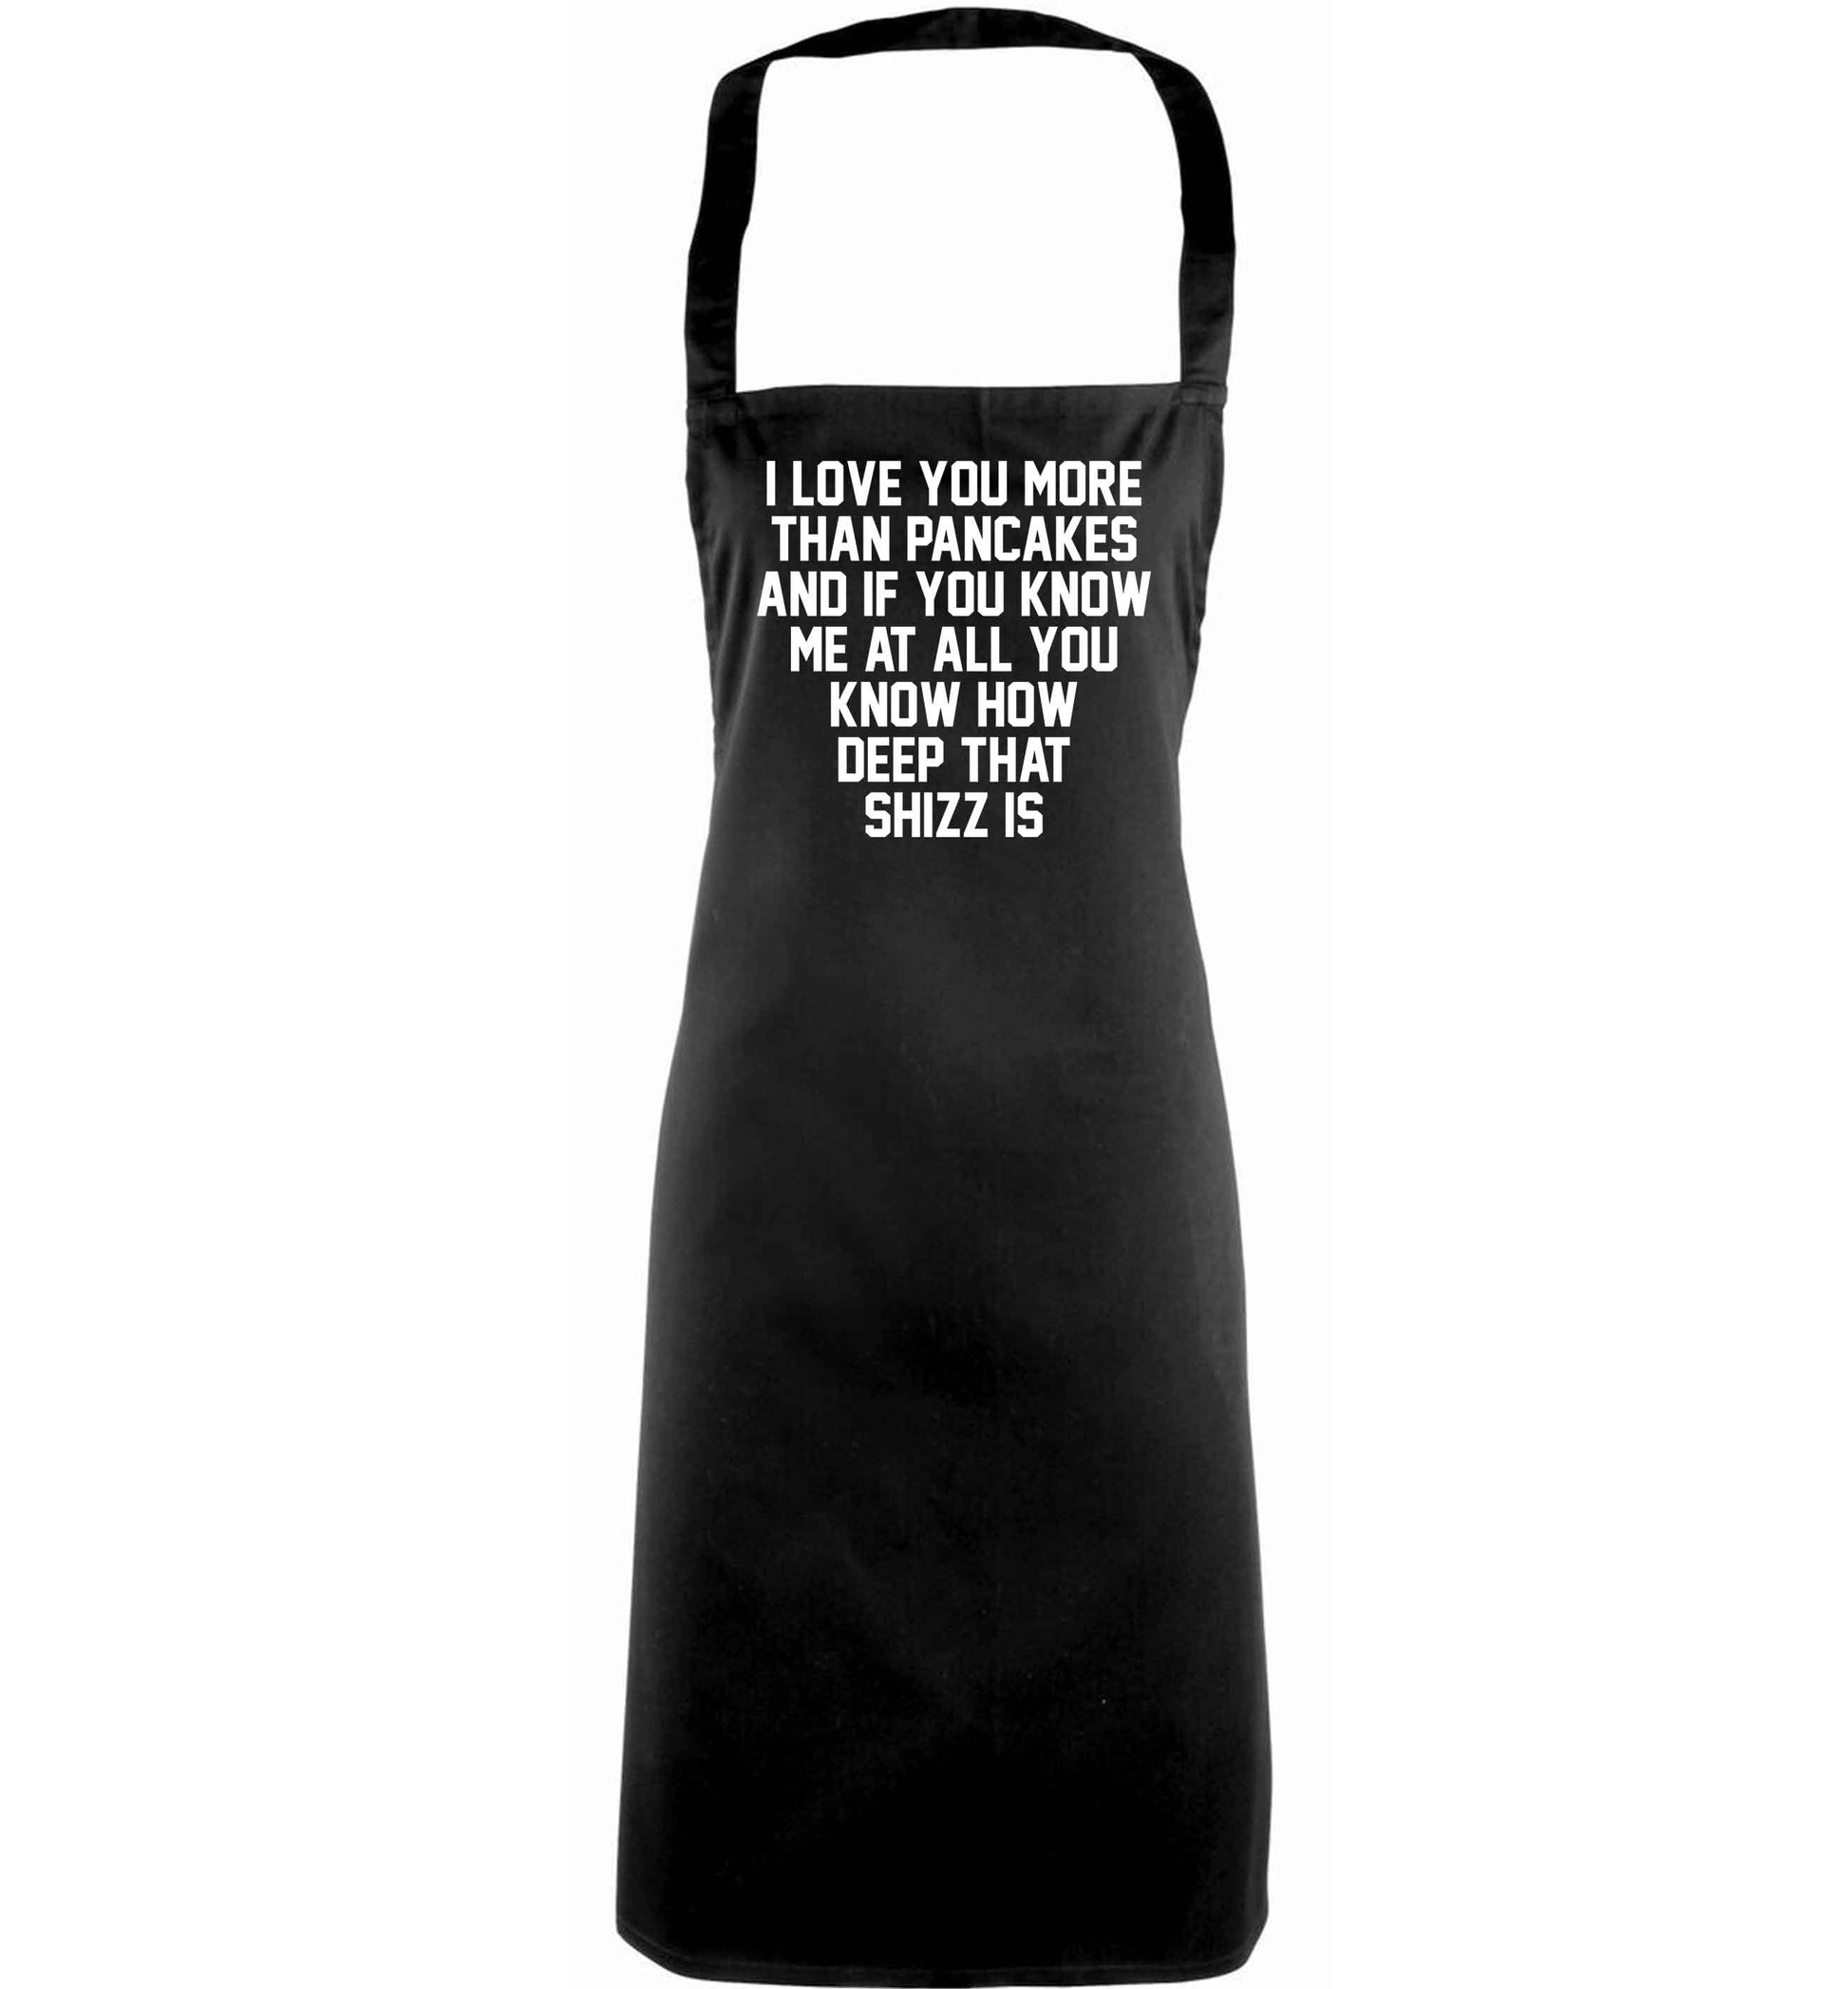 I love you more than pancakes and if you know me at all you know how deep that shizz is adults black apron